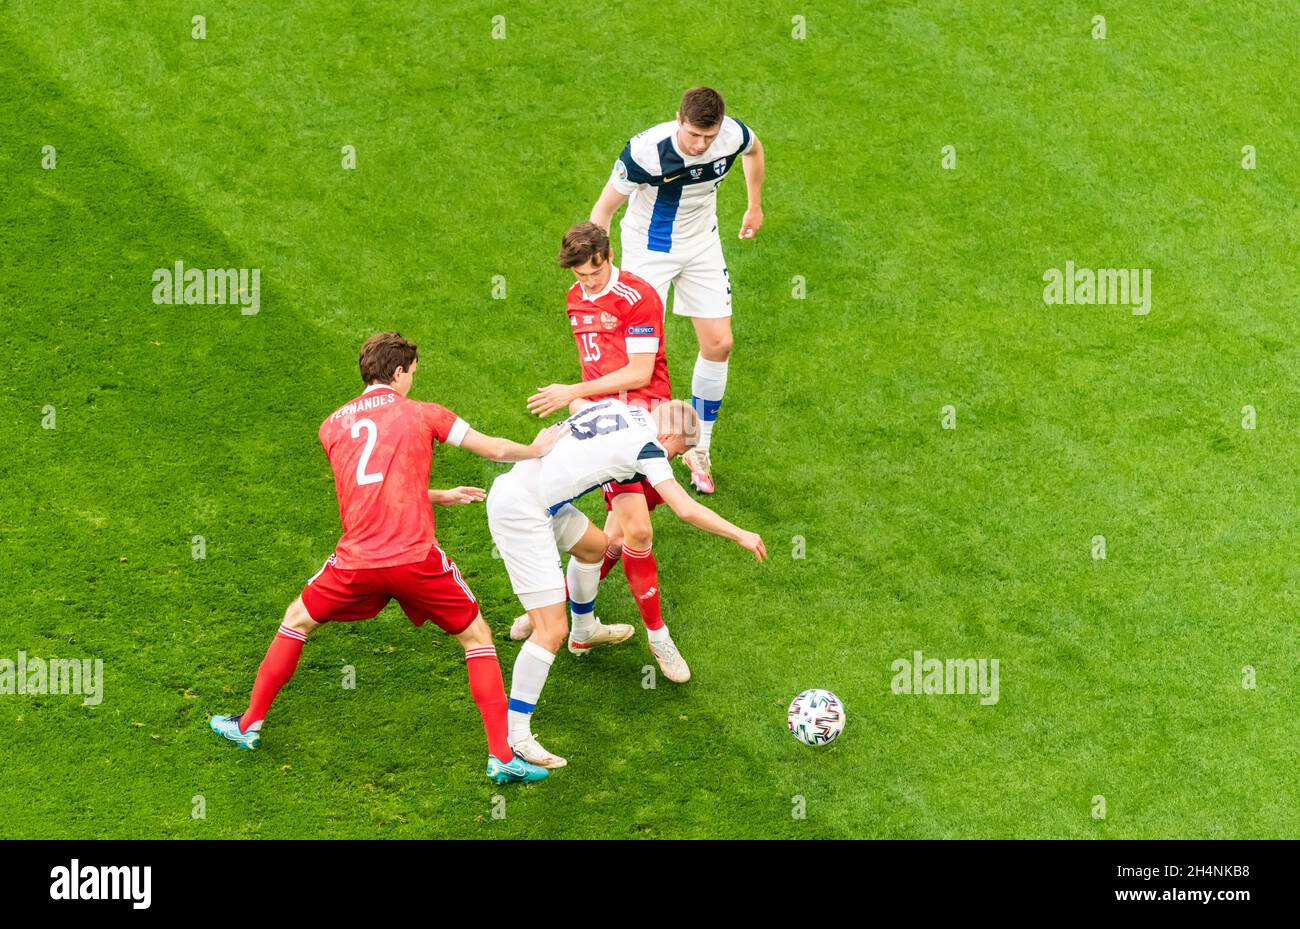 Saint Petersburg, Russia – June 16, 2021. Finland players Jere Uronen and Daniel O'Shaughnessy against Russia players Mario Fernandes and Aleksei Mira Stock Photo